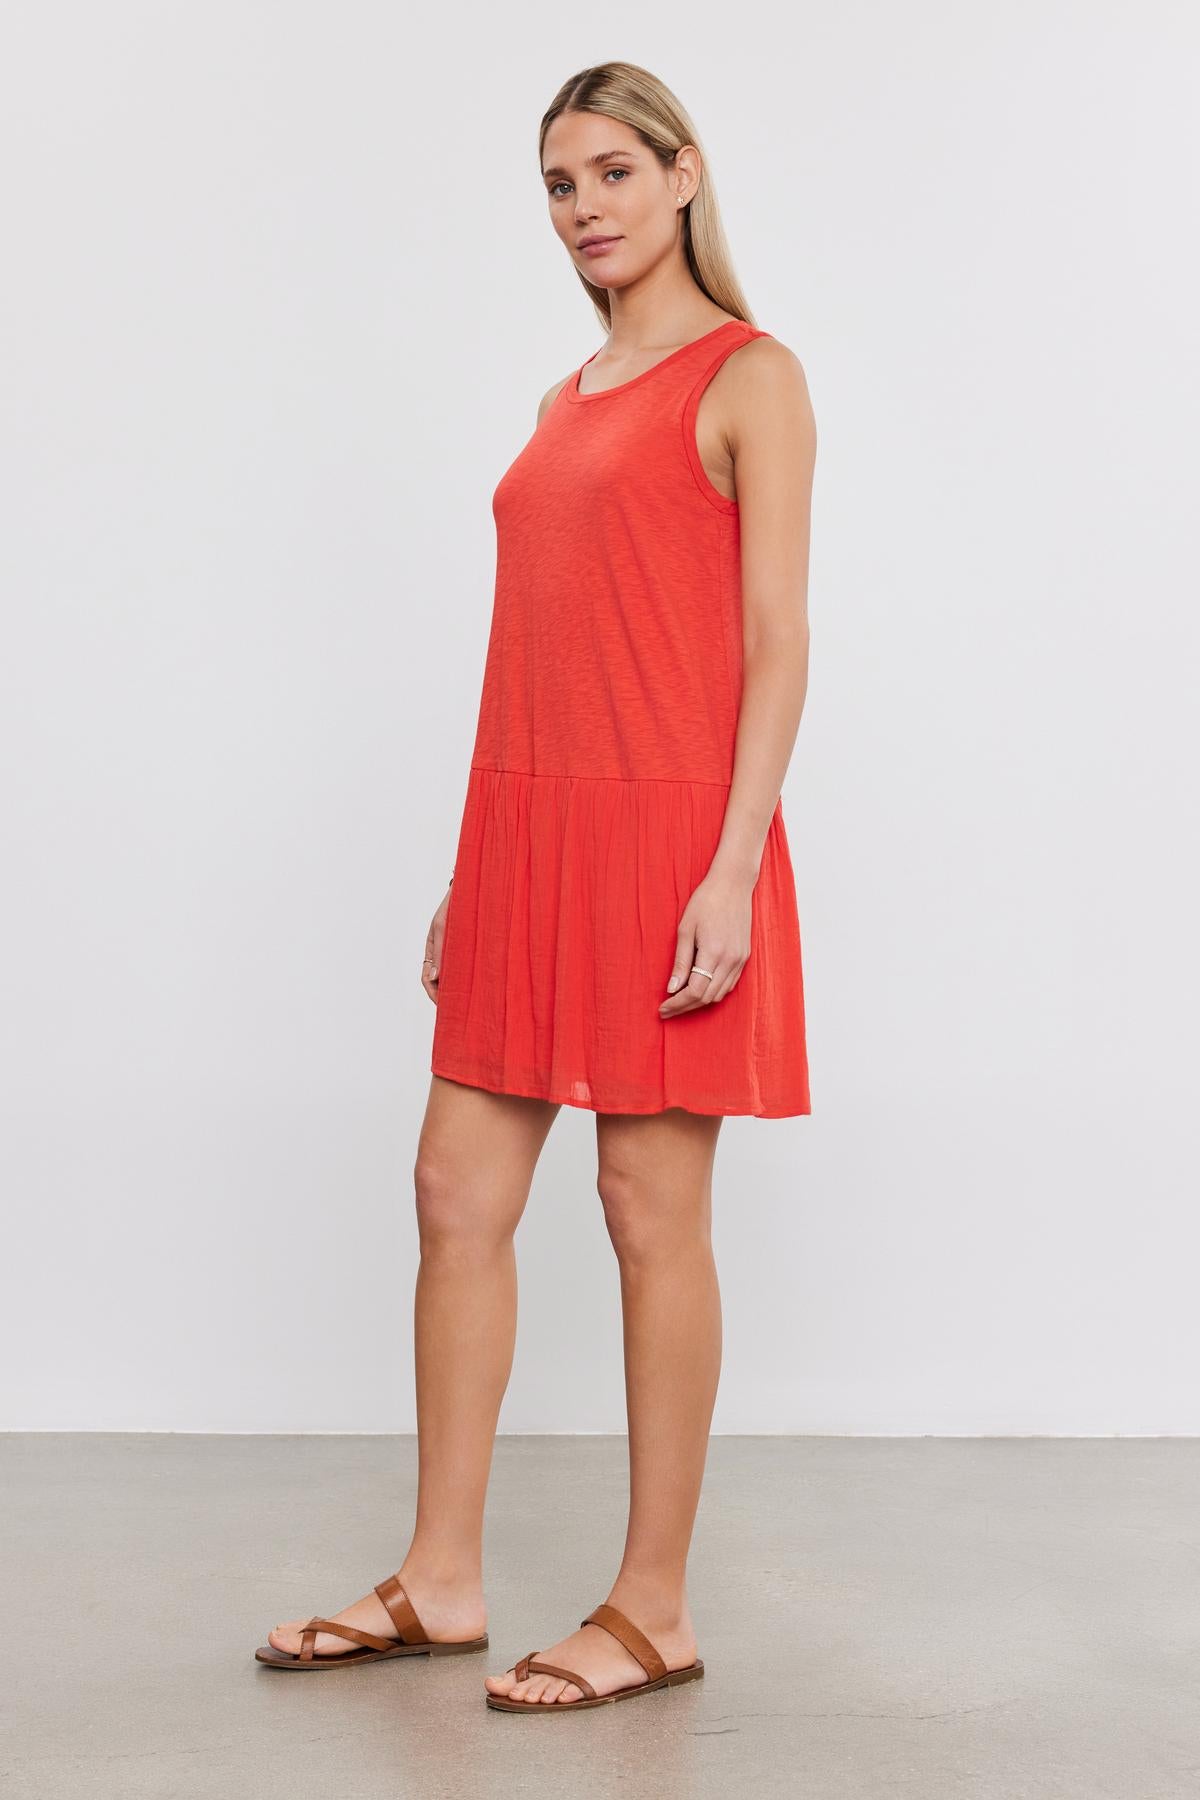 Woman standing in a studio, wearing a red sleeveless MINA DRESS with a tiered skirt and brown sandals, facing slightly right with a neutral expression by Velvet by Graham & Spencer.-36910021443777